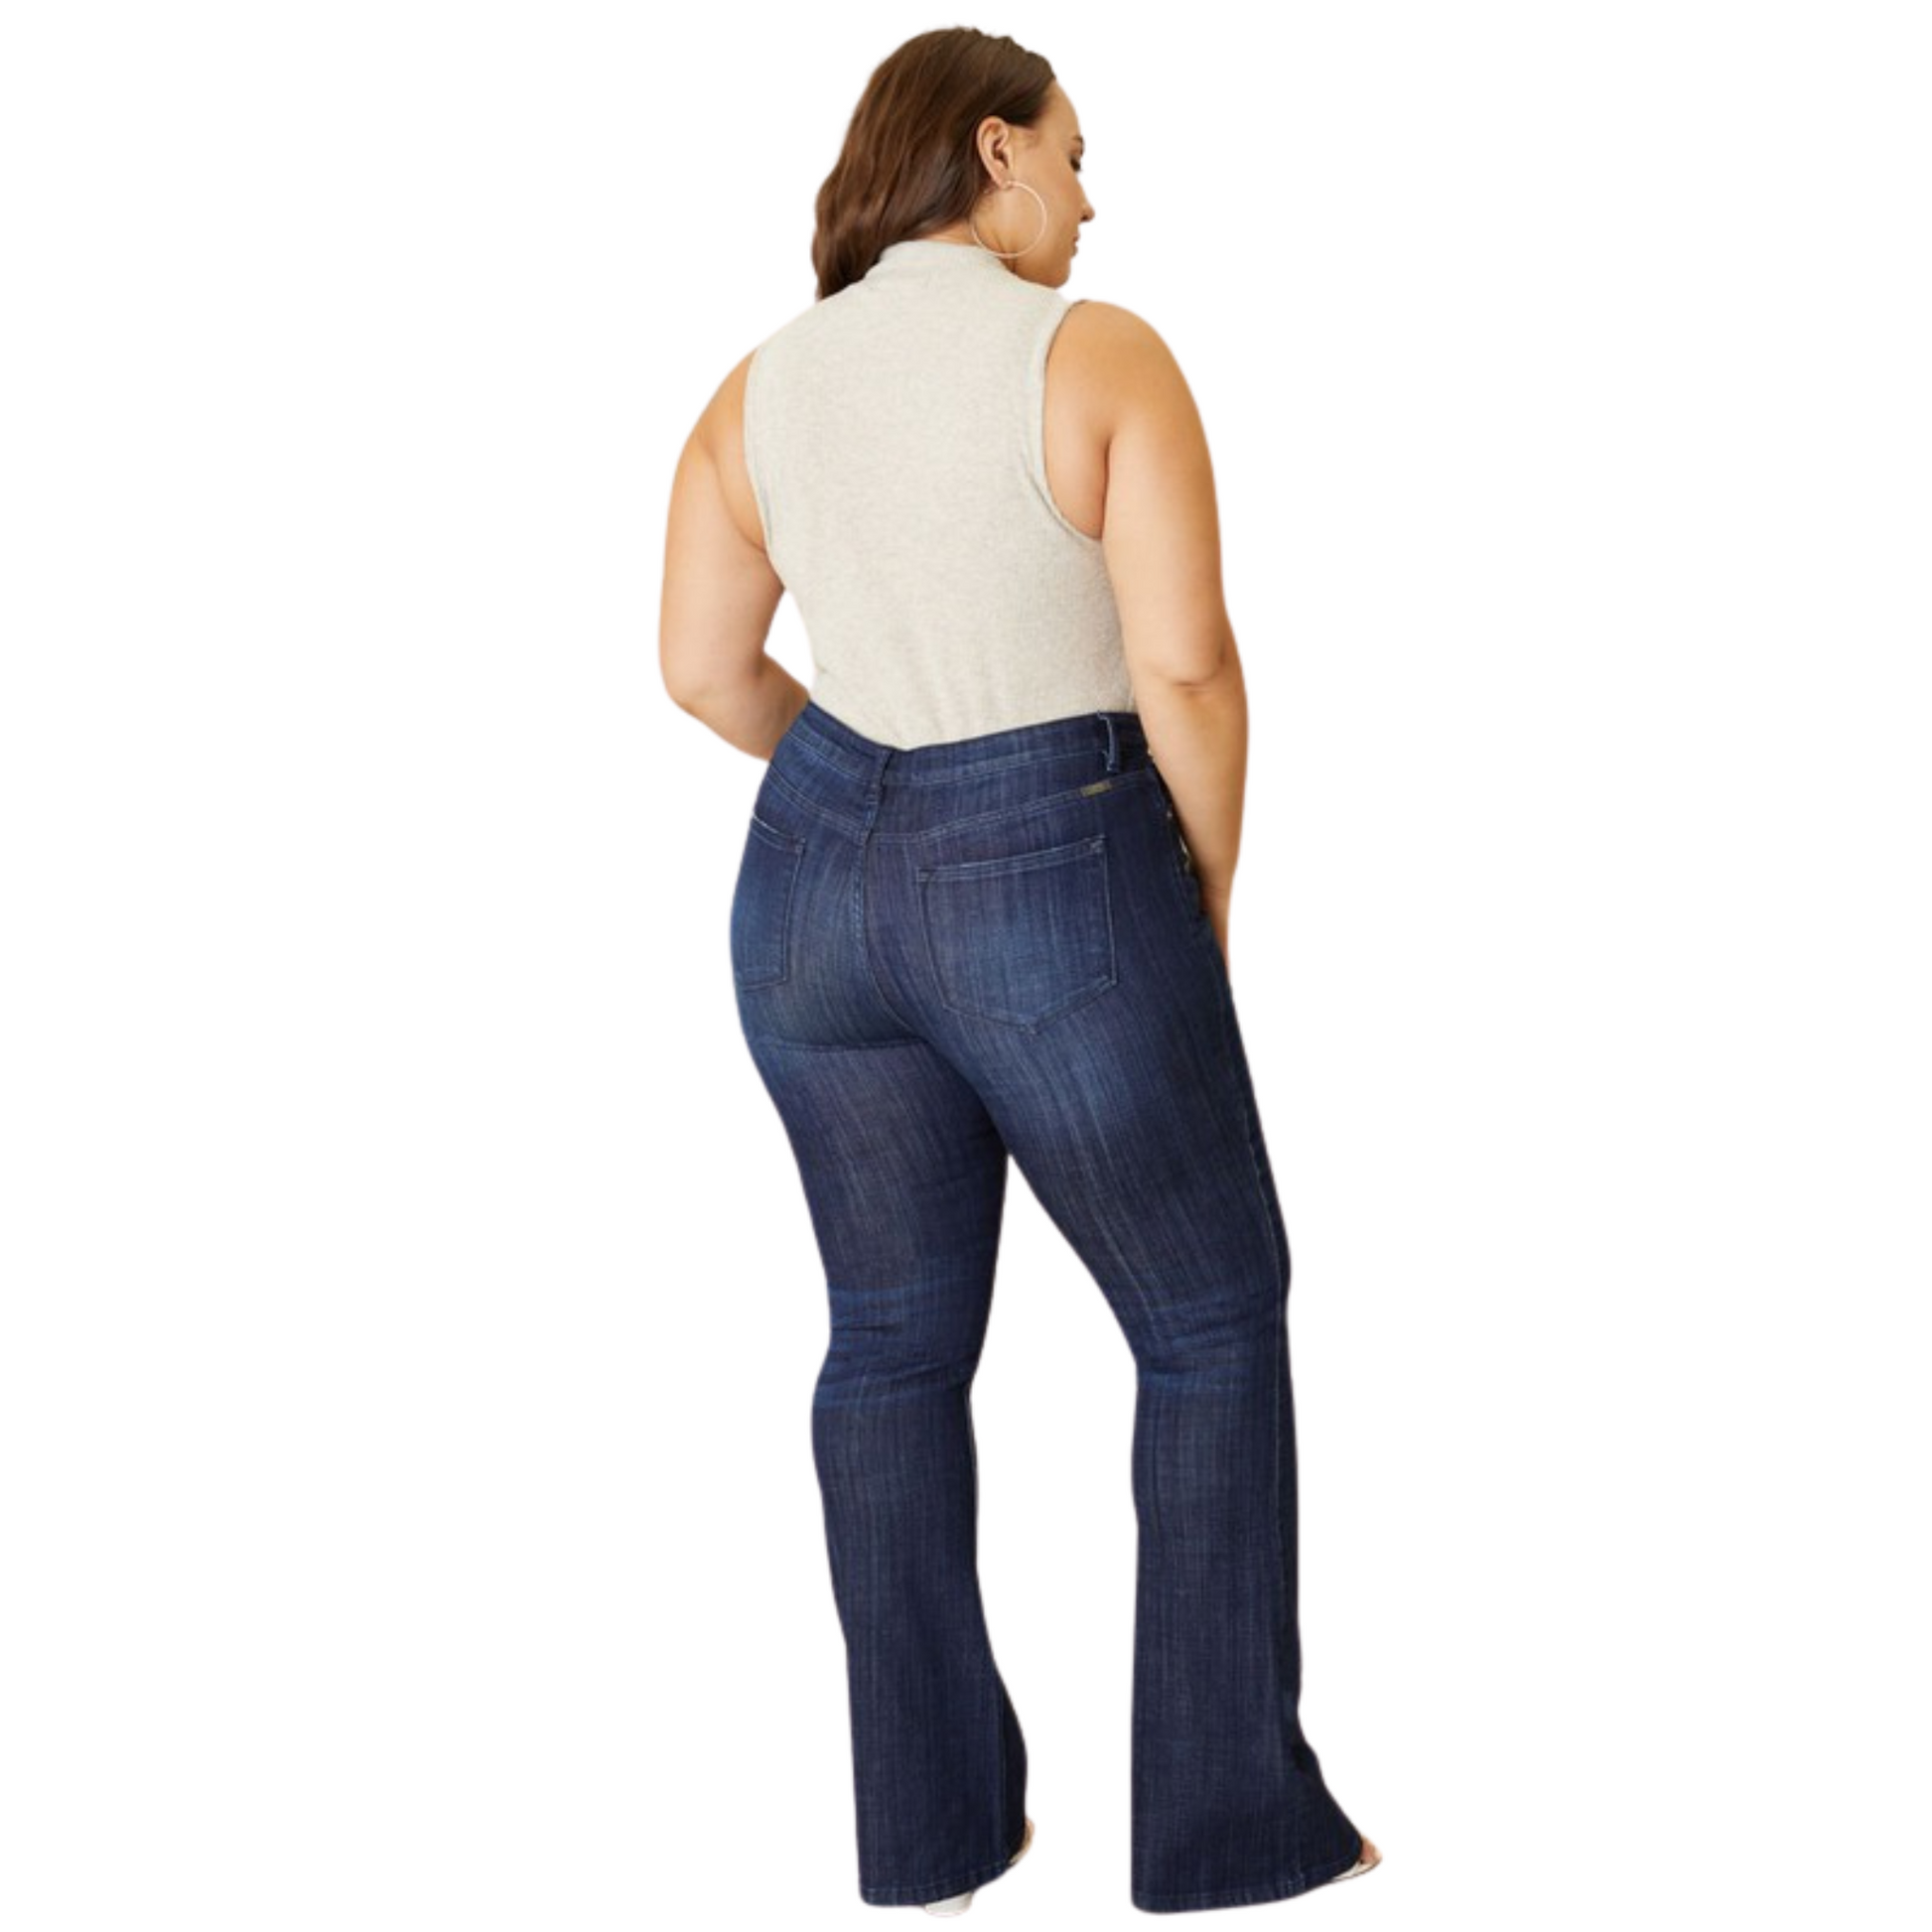 Our Mid-Rise Flare Jeans from Kancan offer a comfortable fit for curvy bodies. With a dark wash, these plus size jeans are perfect for day or night. Enjoy a fashionable and comfy look with these stylish jeans.